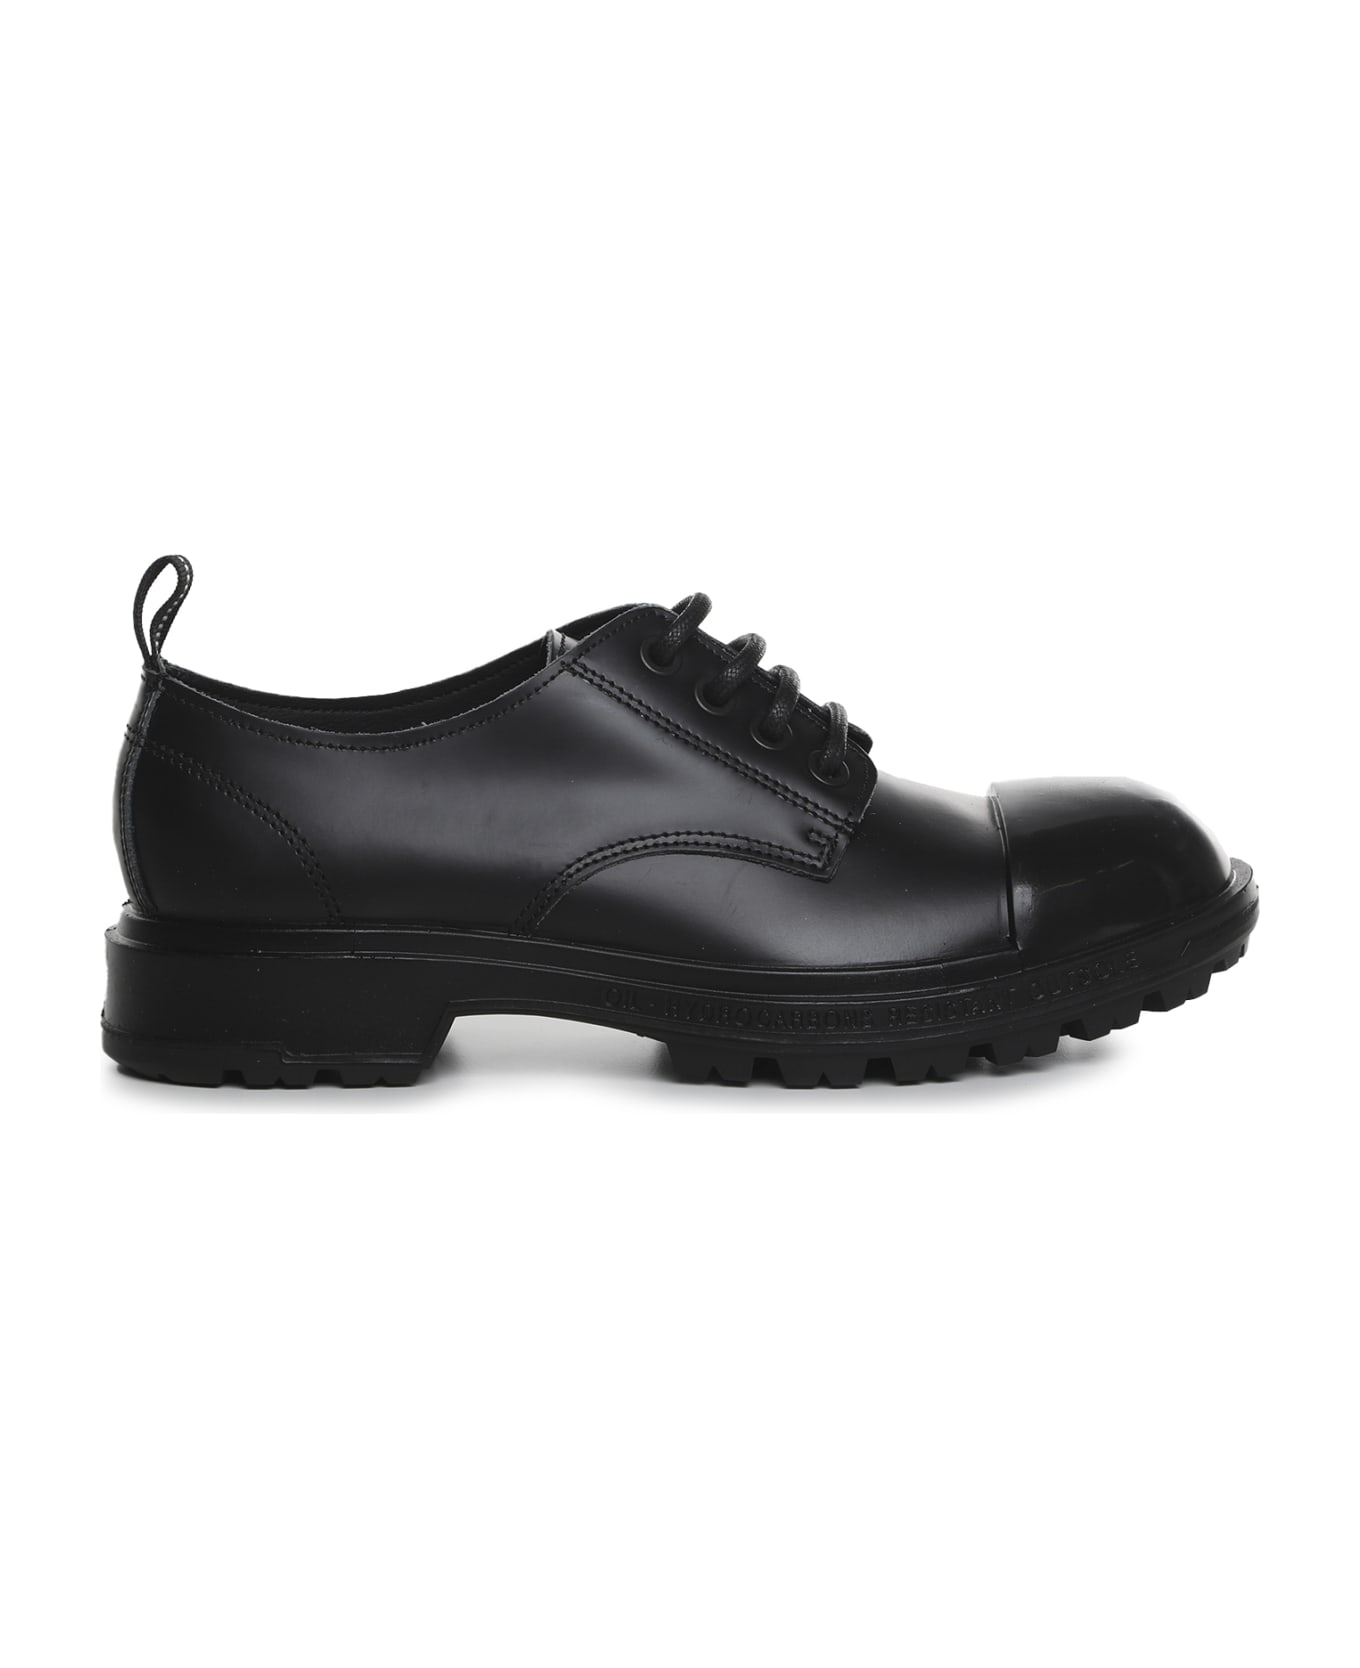 Pezzol 1951 Smooth Leather Derby Shoes - Black